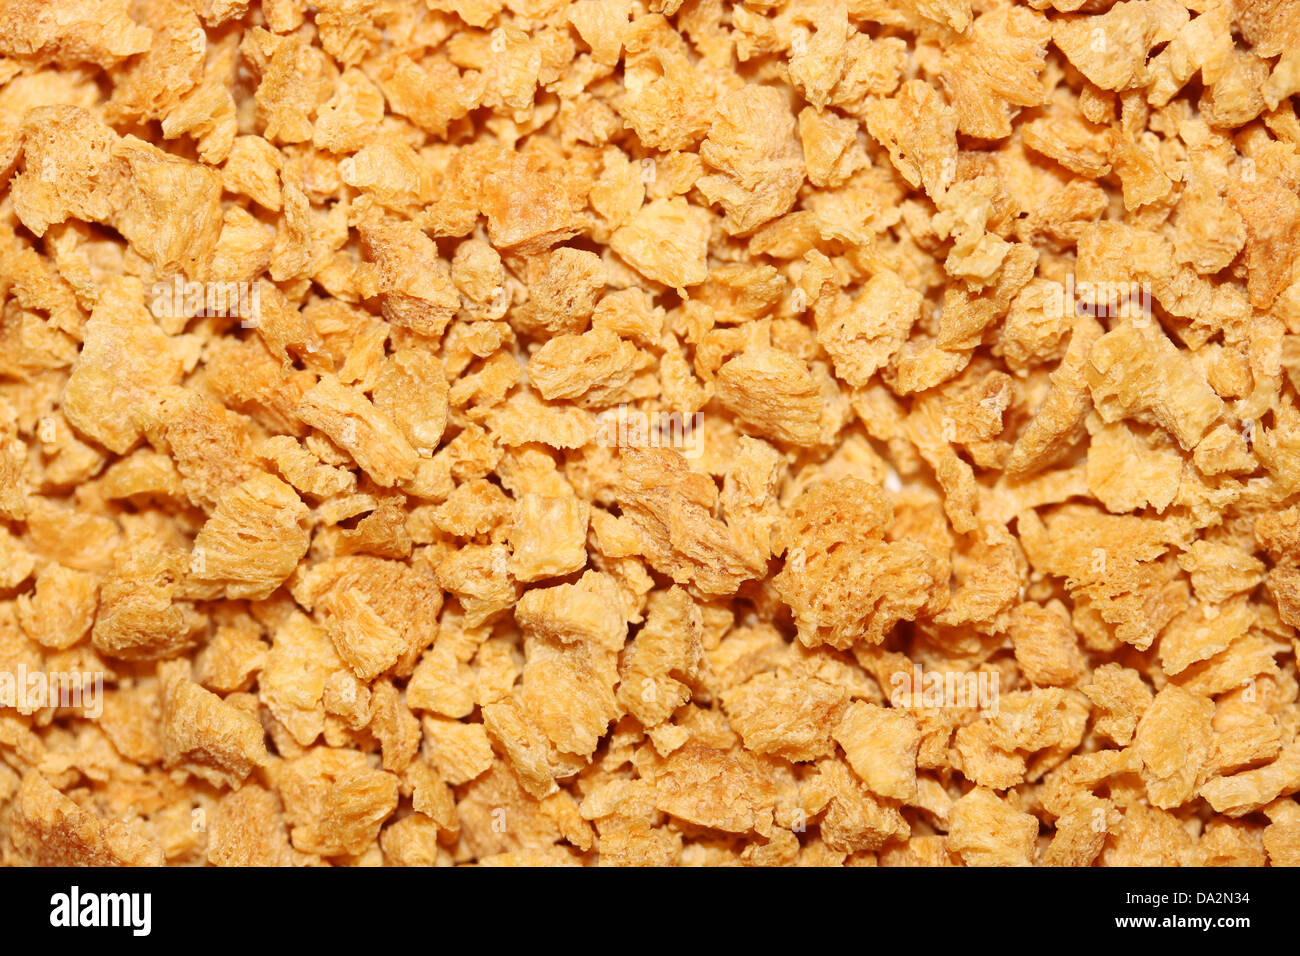 This is a soybean flakes, like nice food background Stock Photo